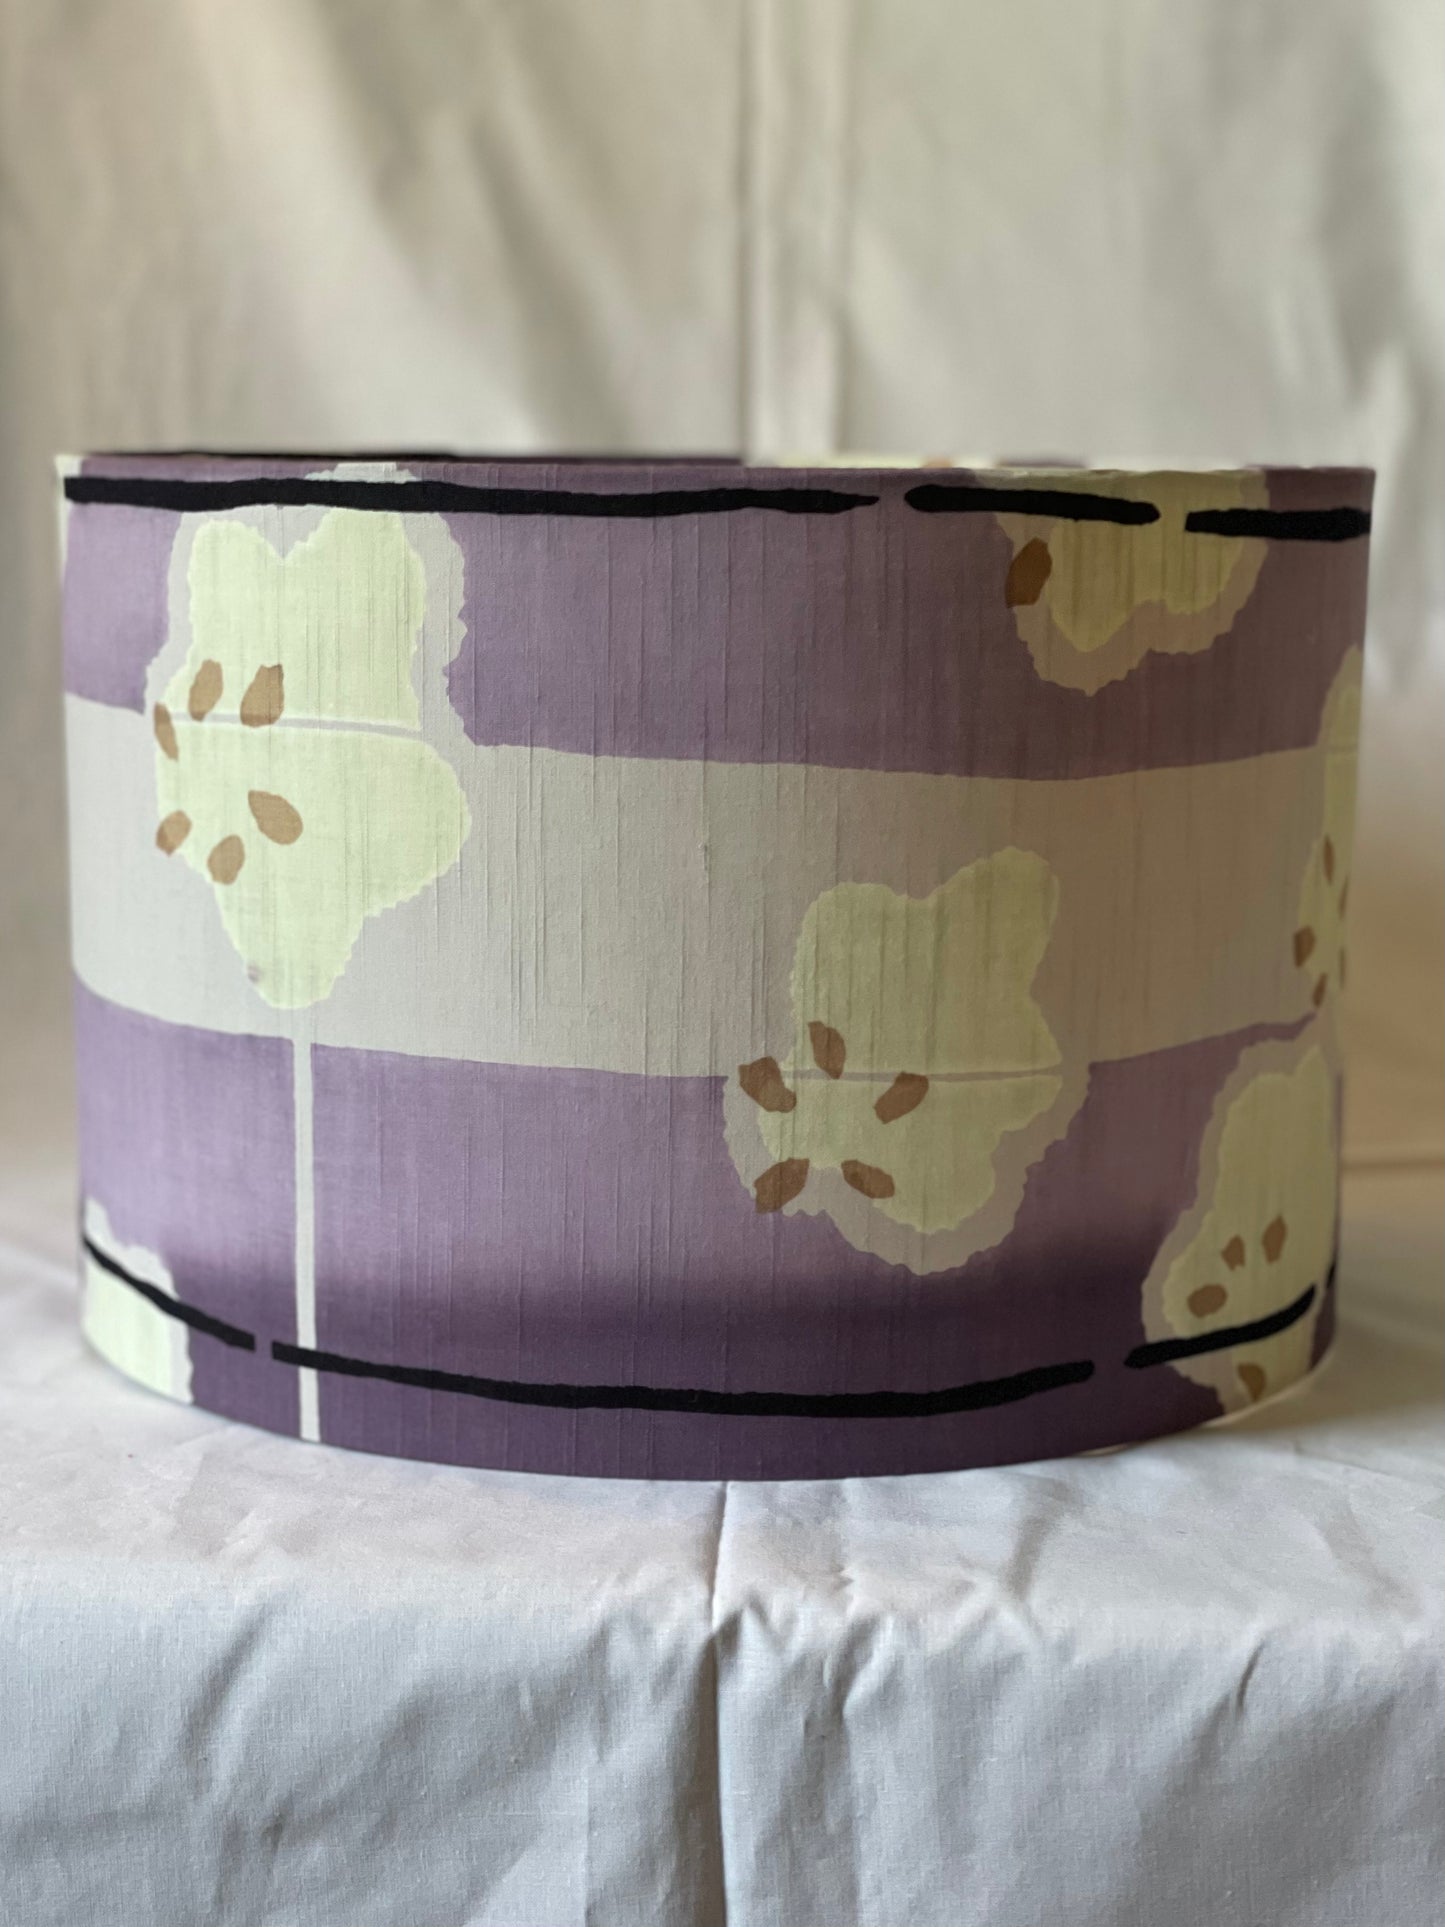 12 Inch Drum Shade. Vintage Summer Kimono Fabric. Slightly Textured shades of Lilac, Smoky Purple and Grey.